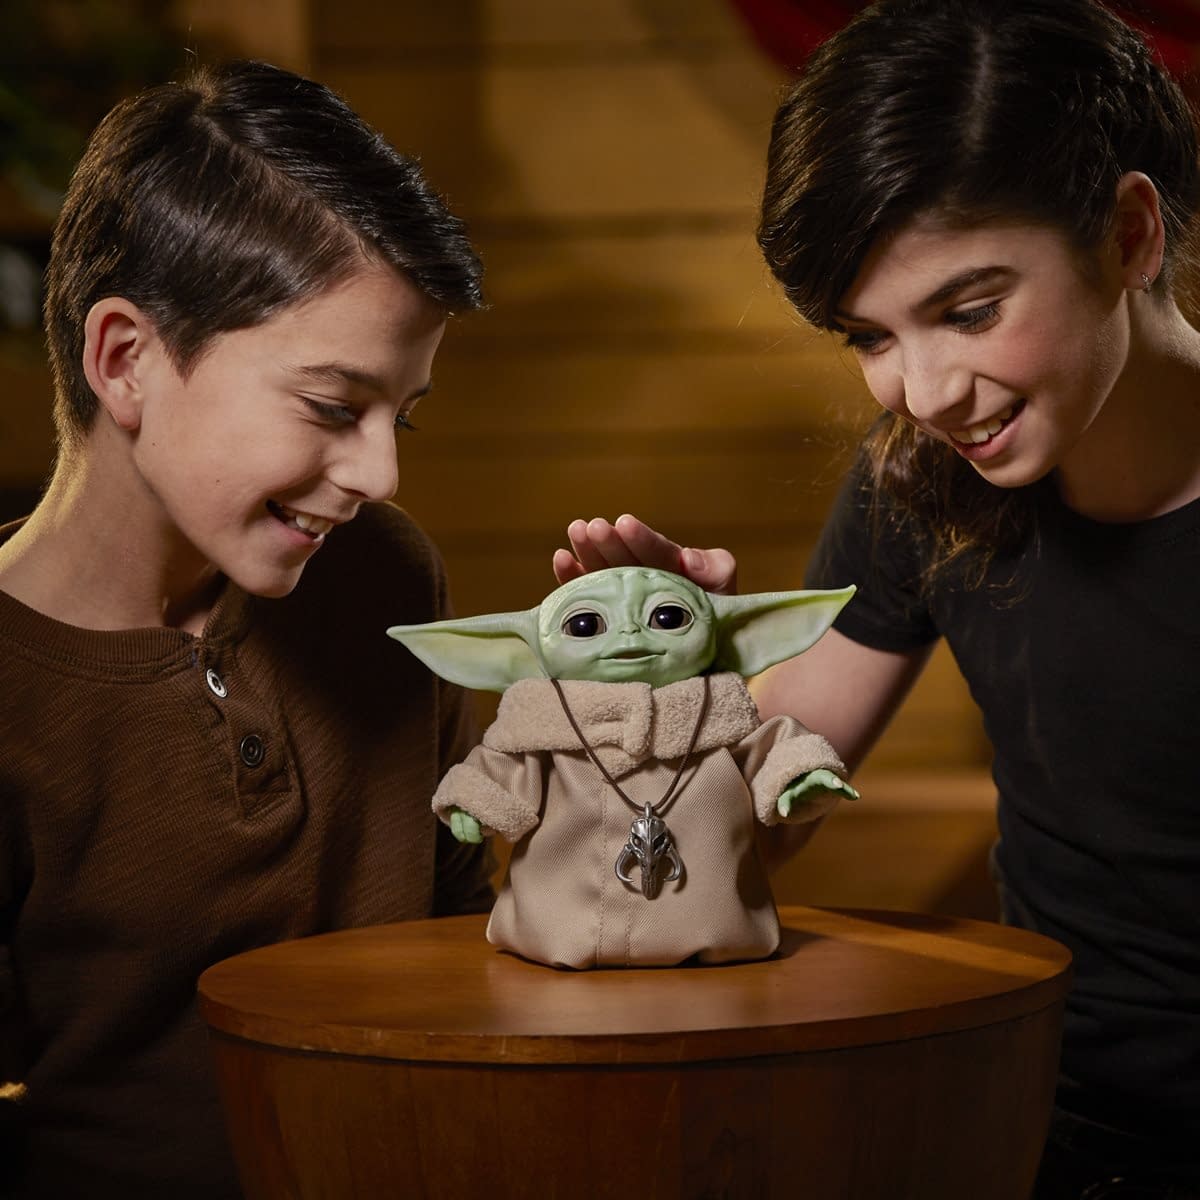 Baby Yoda Comes to Life with New Animatronic Toys from Hasbro